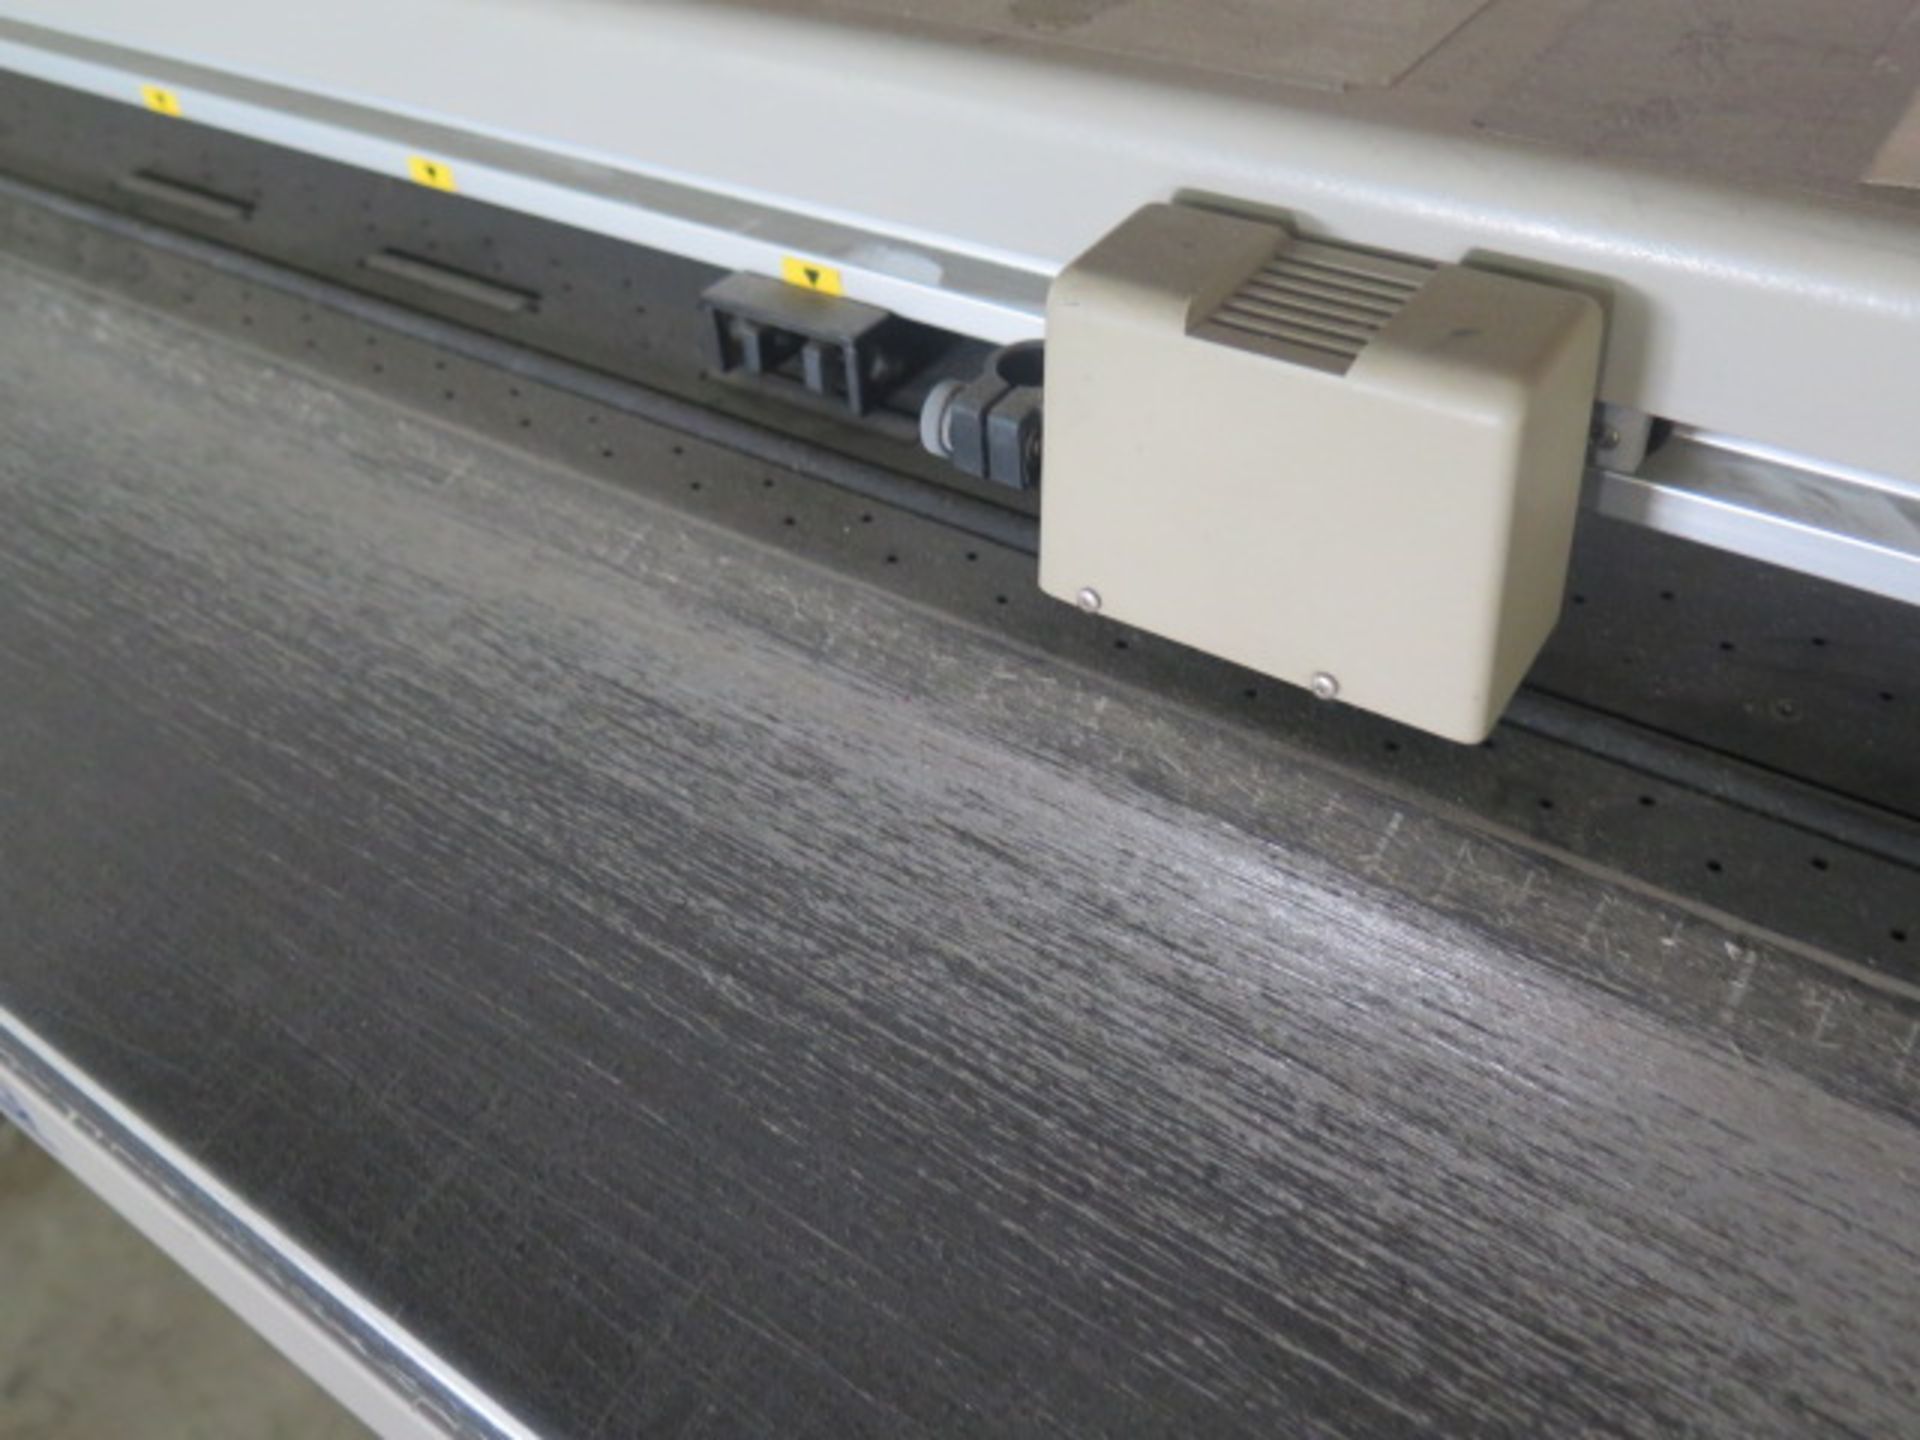 Graftec "Cutter Pro" FC2100-120 Cutter Plotter - Image 3 of 4